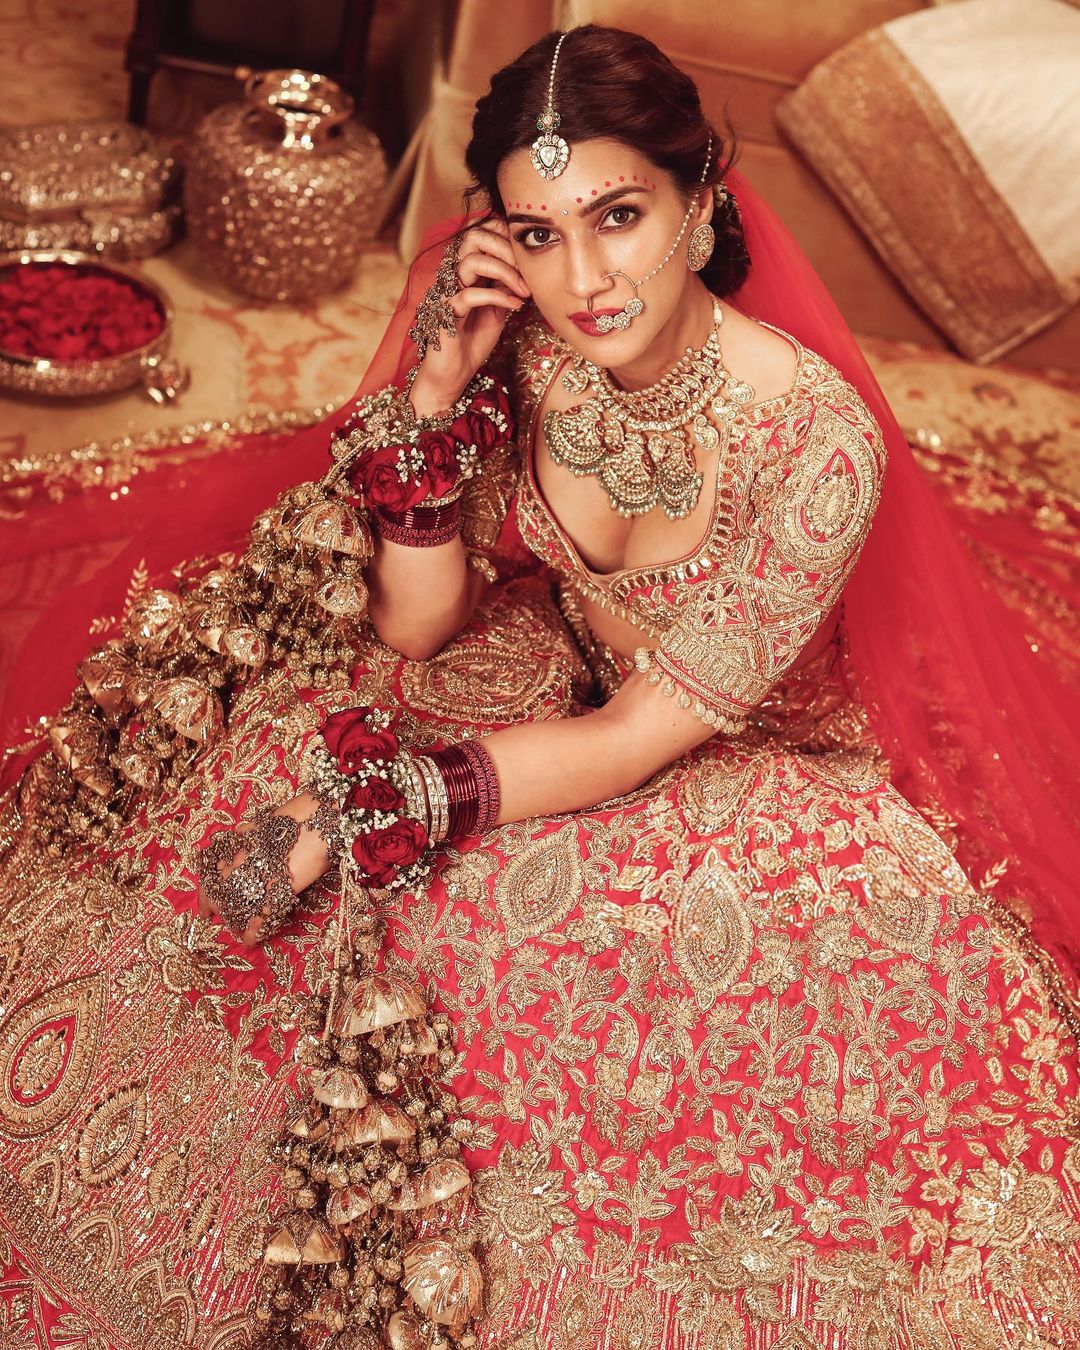 Kriti Sanon In A Gorgeous Red Bridal Lehenga In Manish Malhotra Outfit Moviekoop